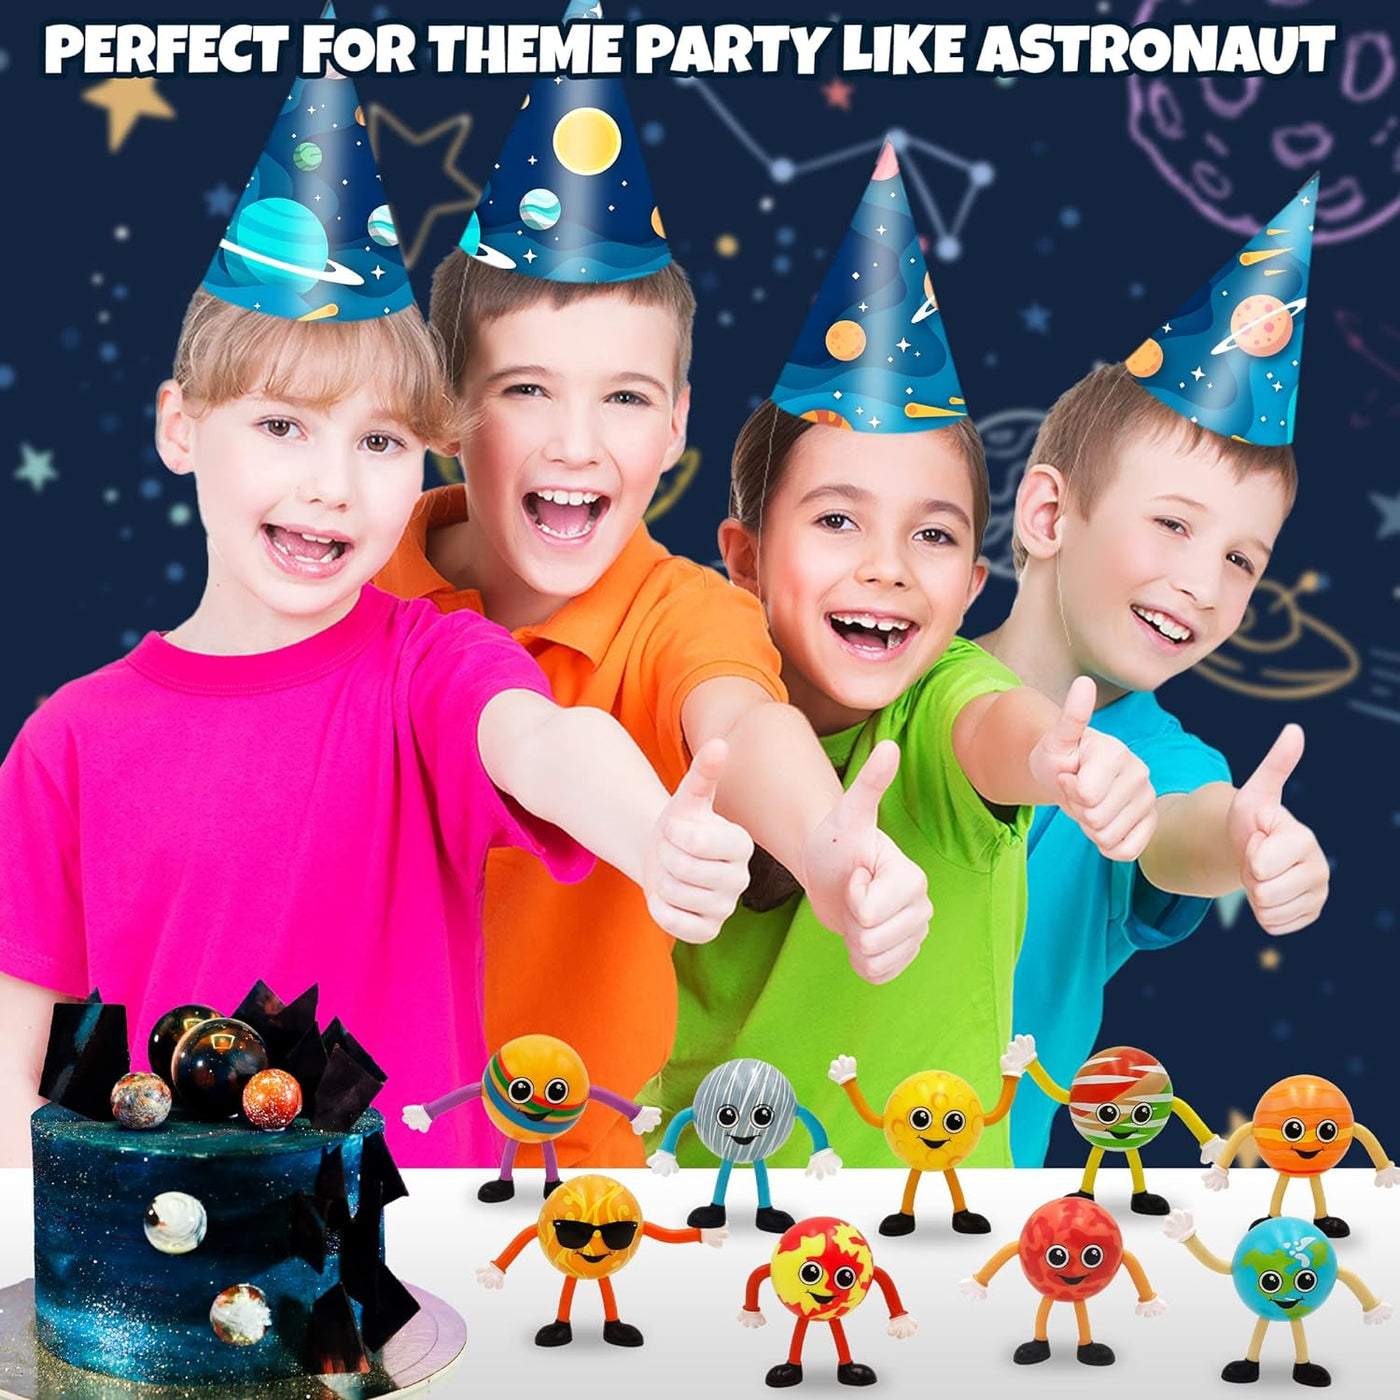 Solar System Toys for Kids - 9 pc Bendable Planet Figurines - Unique Space Toy for Kids 3-12 - Measures 2.75" - Ideal for Space Parties, Gifting, or Party Favor - Educational Planets Sheet Included